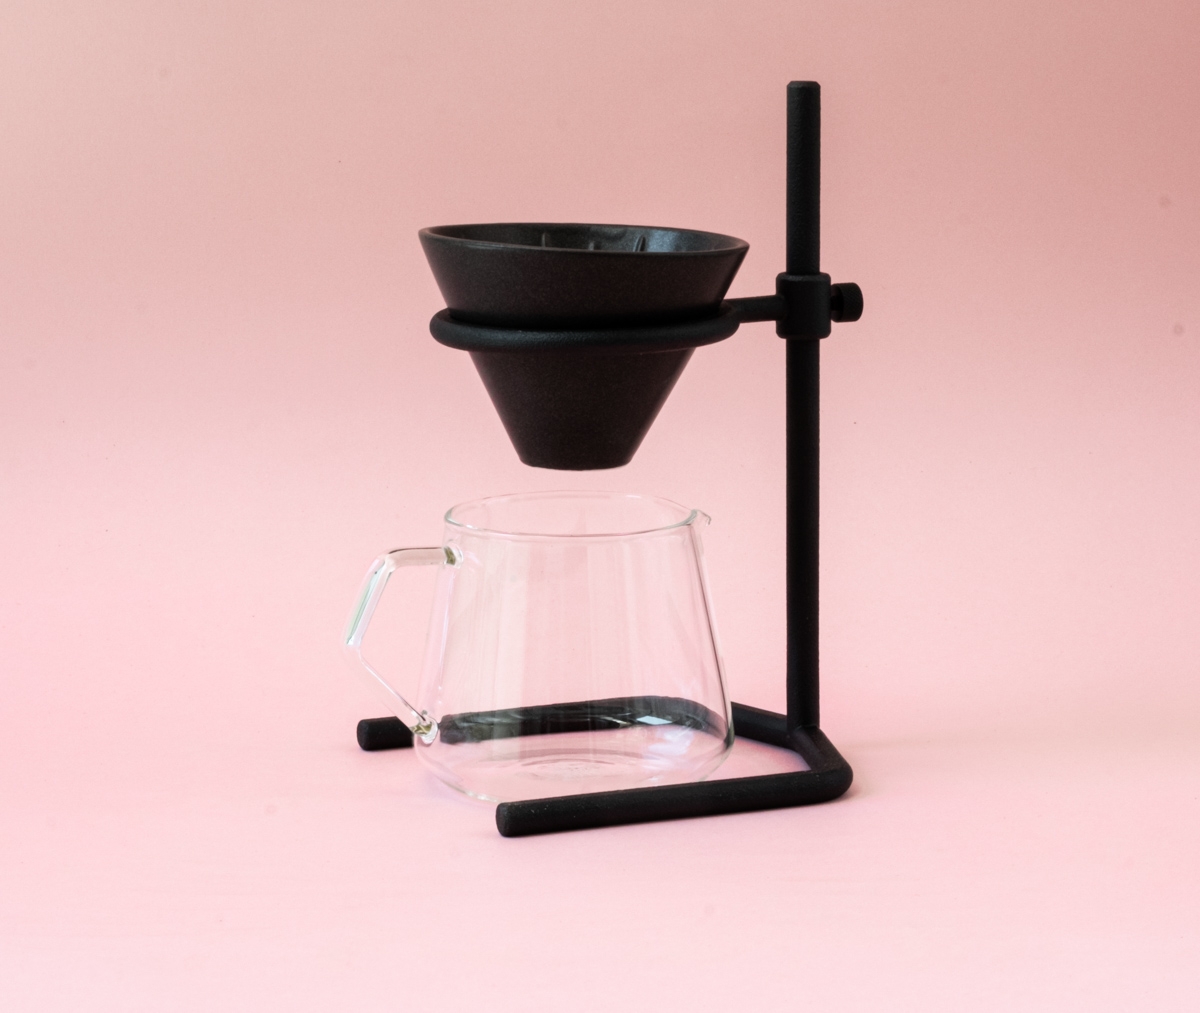 BREWER SLOW COFFEE STYLE STAND SET 2 CUPS - BLACK, KINTO